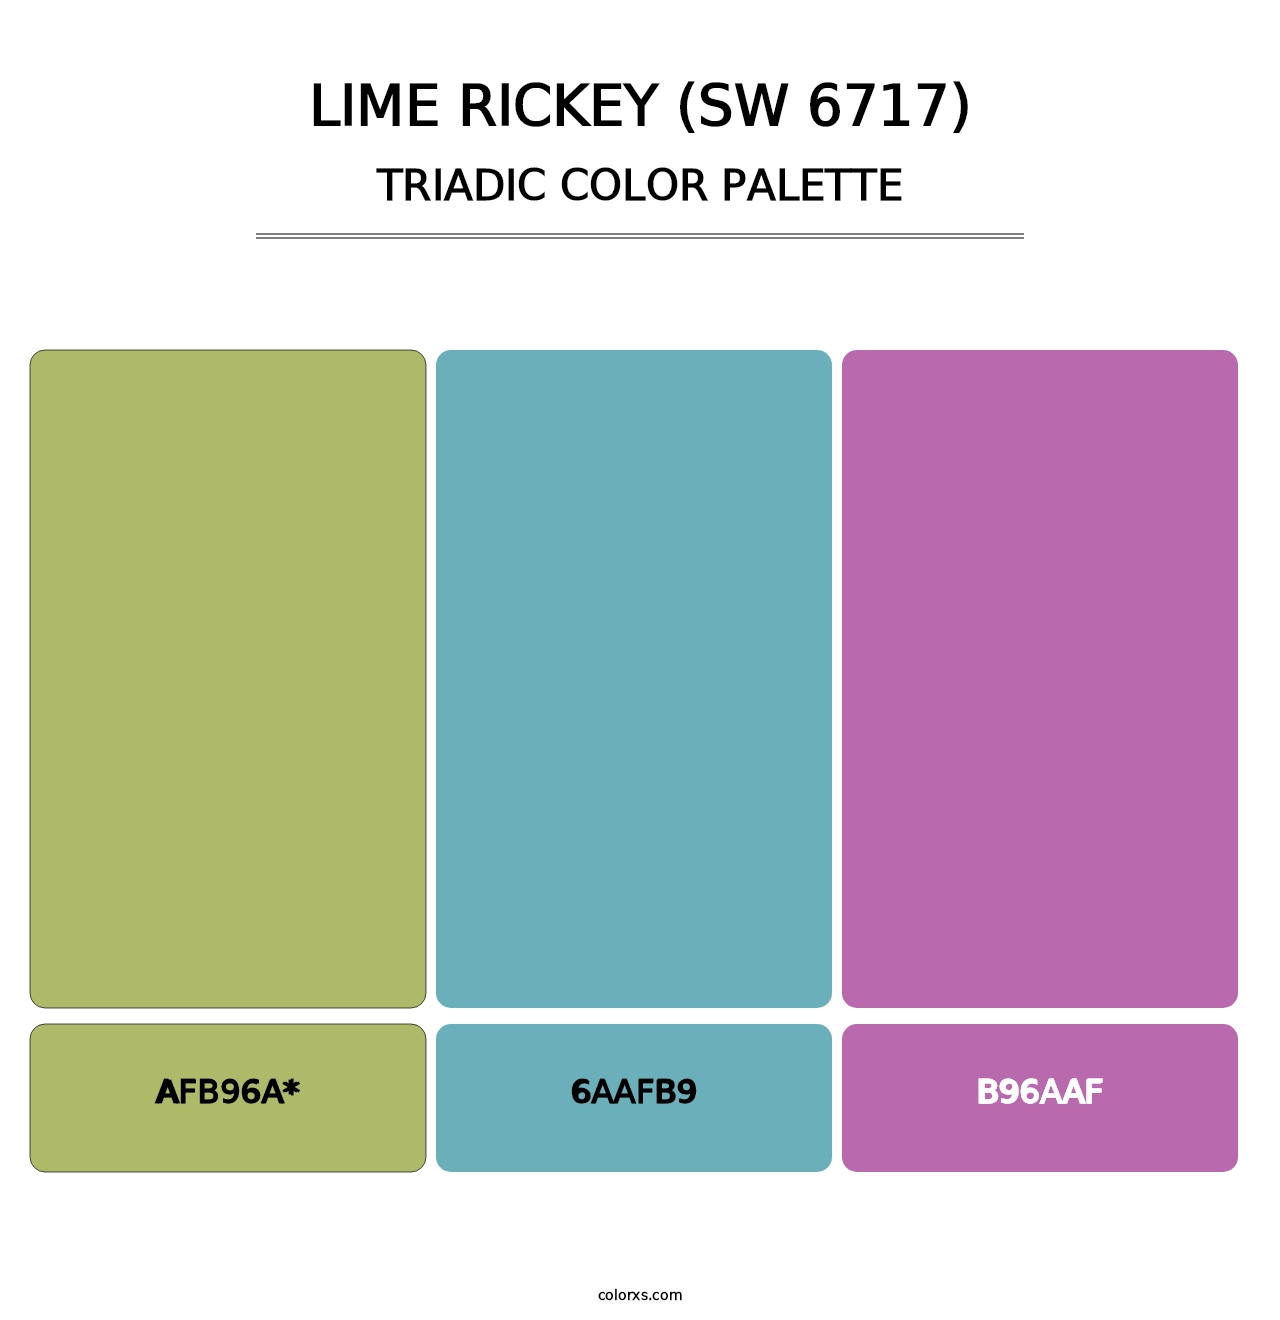 Lime Rickey (SW 6717) - Triadic Color Palette